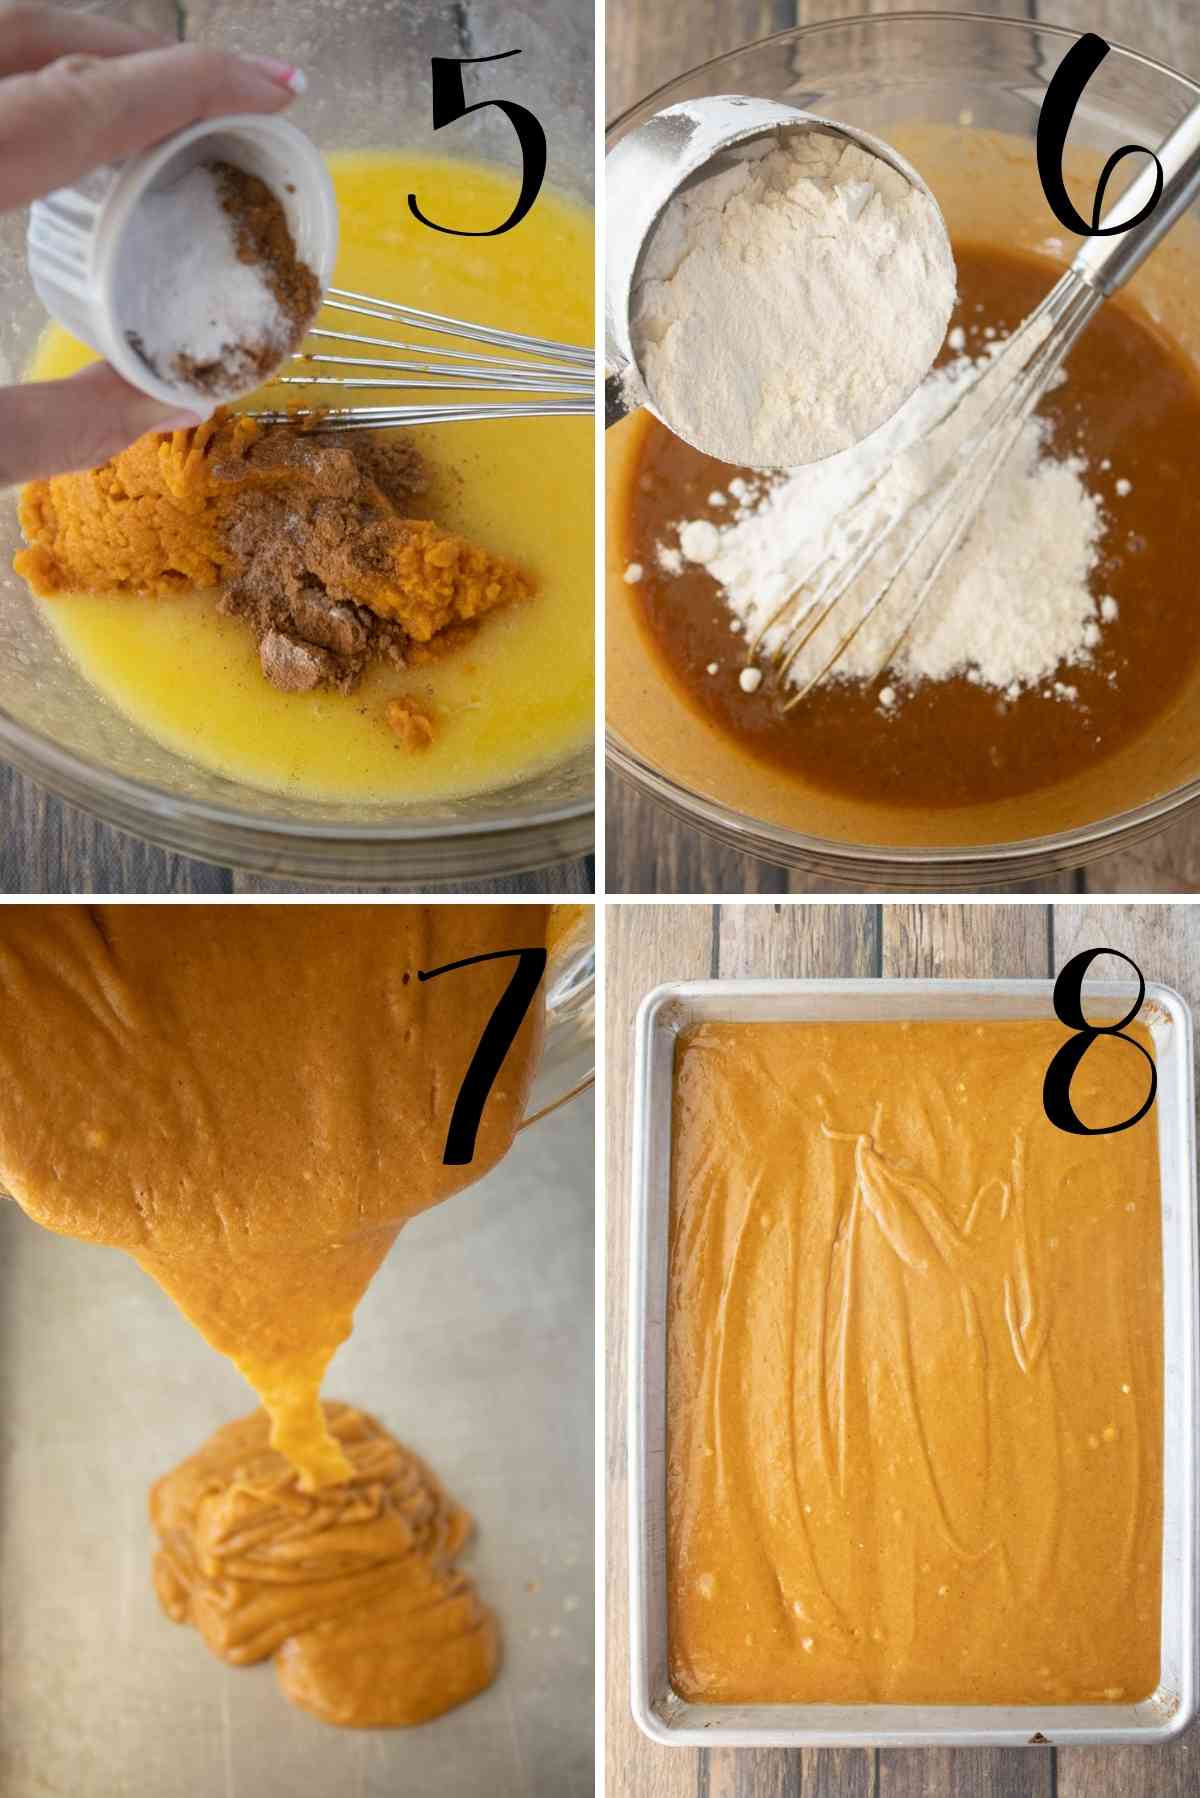 Mix in the dry ingredients and pour pumpkin batter on a prepared baking sheet.